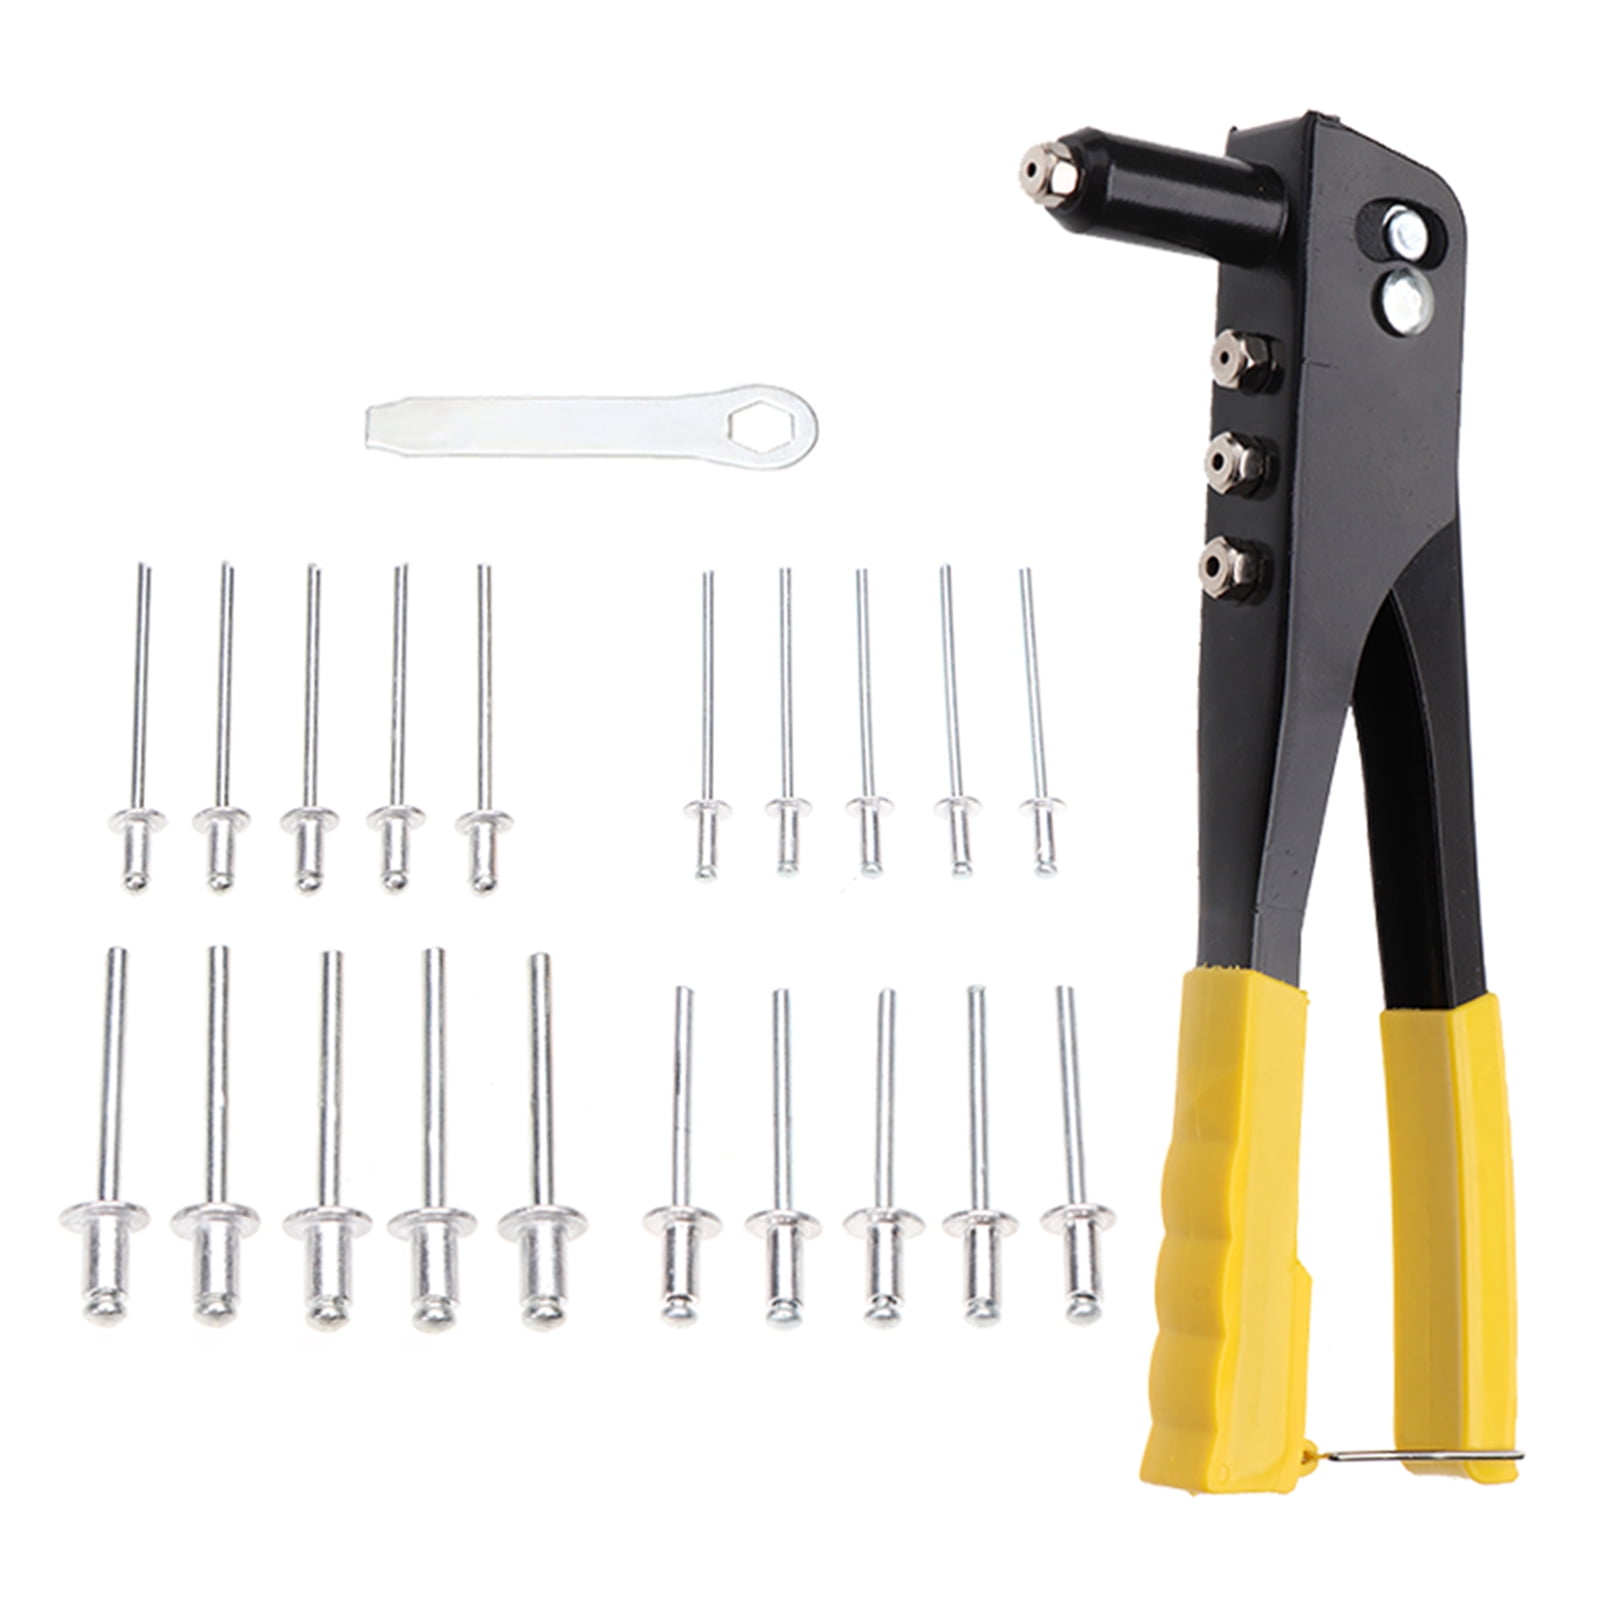 HAND POP RIVETER WITH 60 RIVETS KIT 